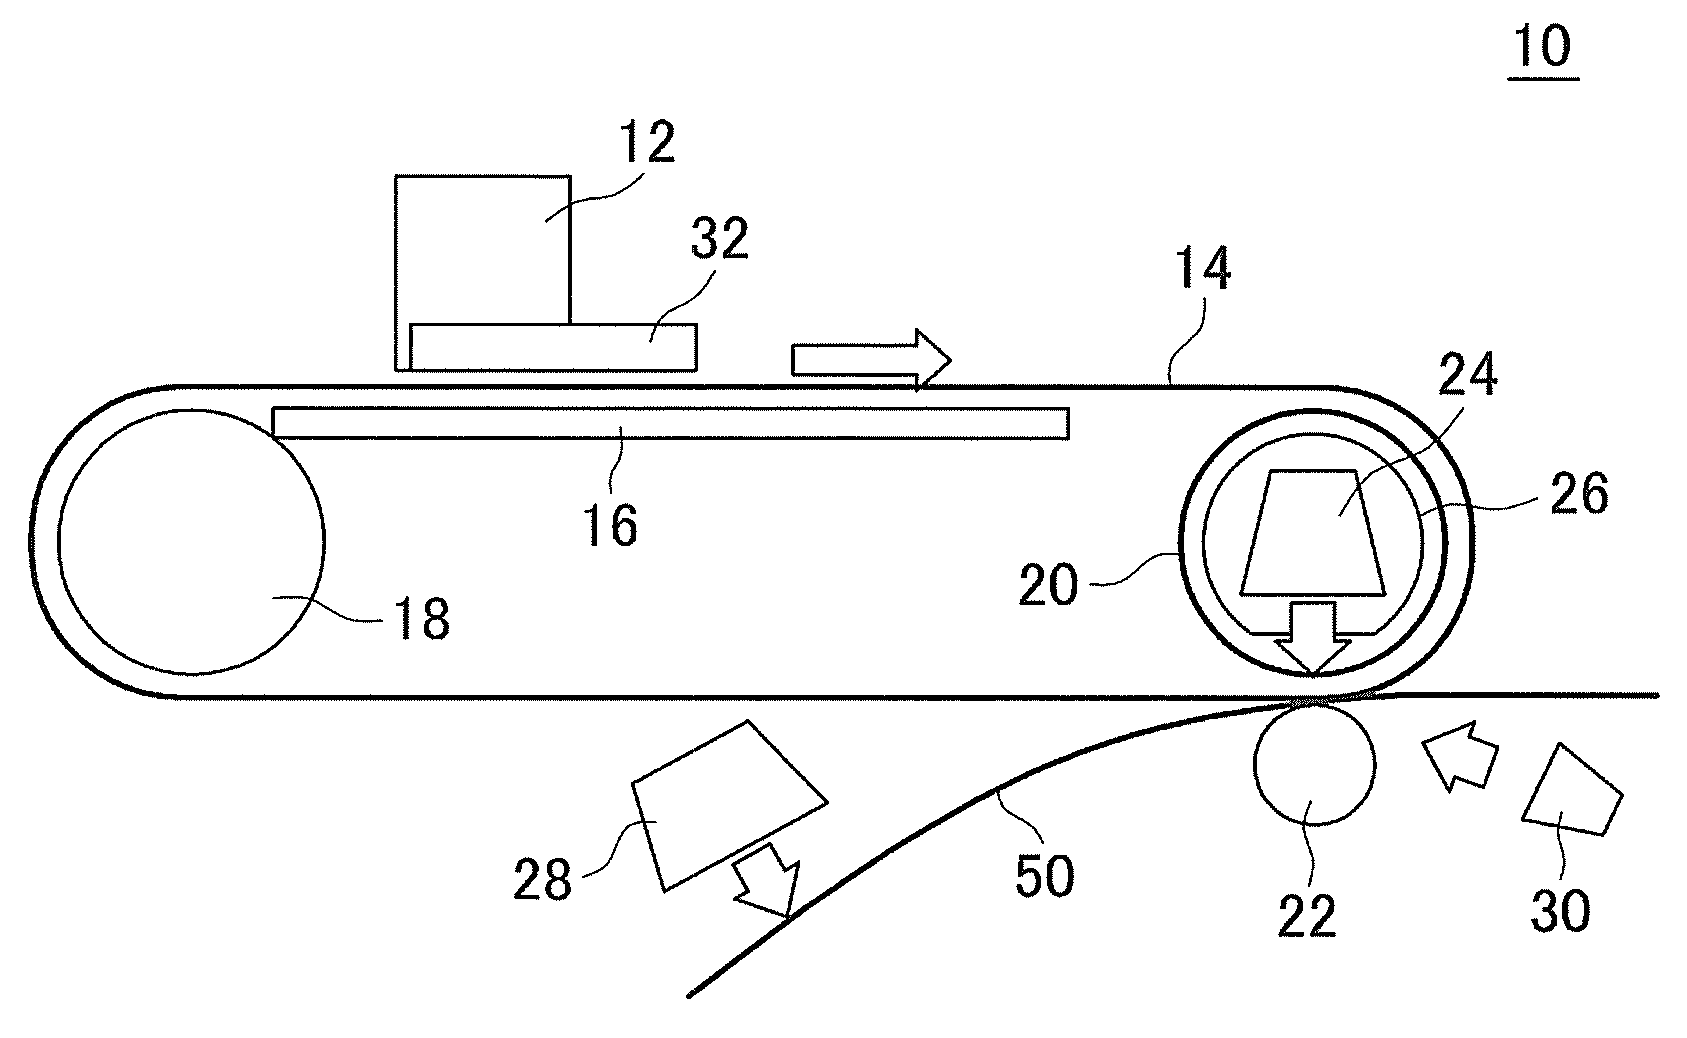 Inkjet printer and printing method using solvent-containing ink